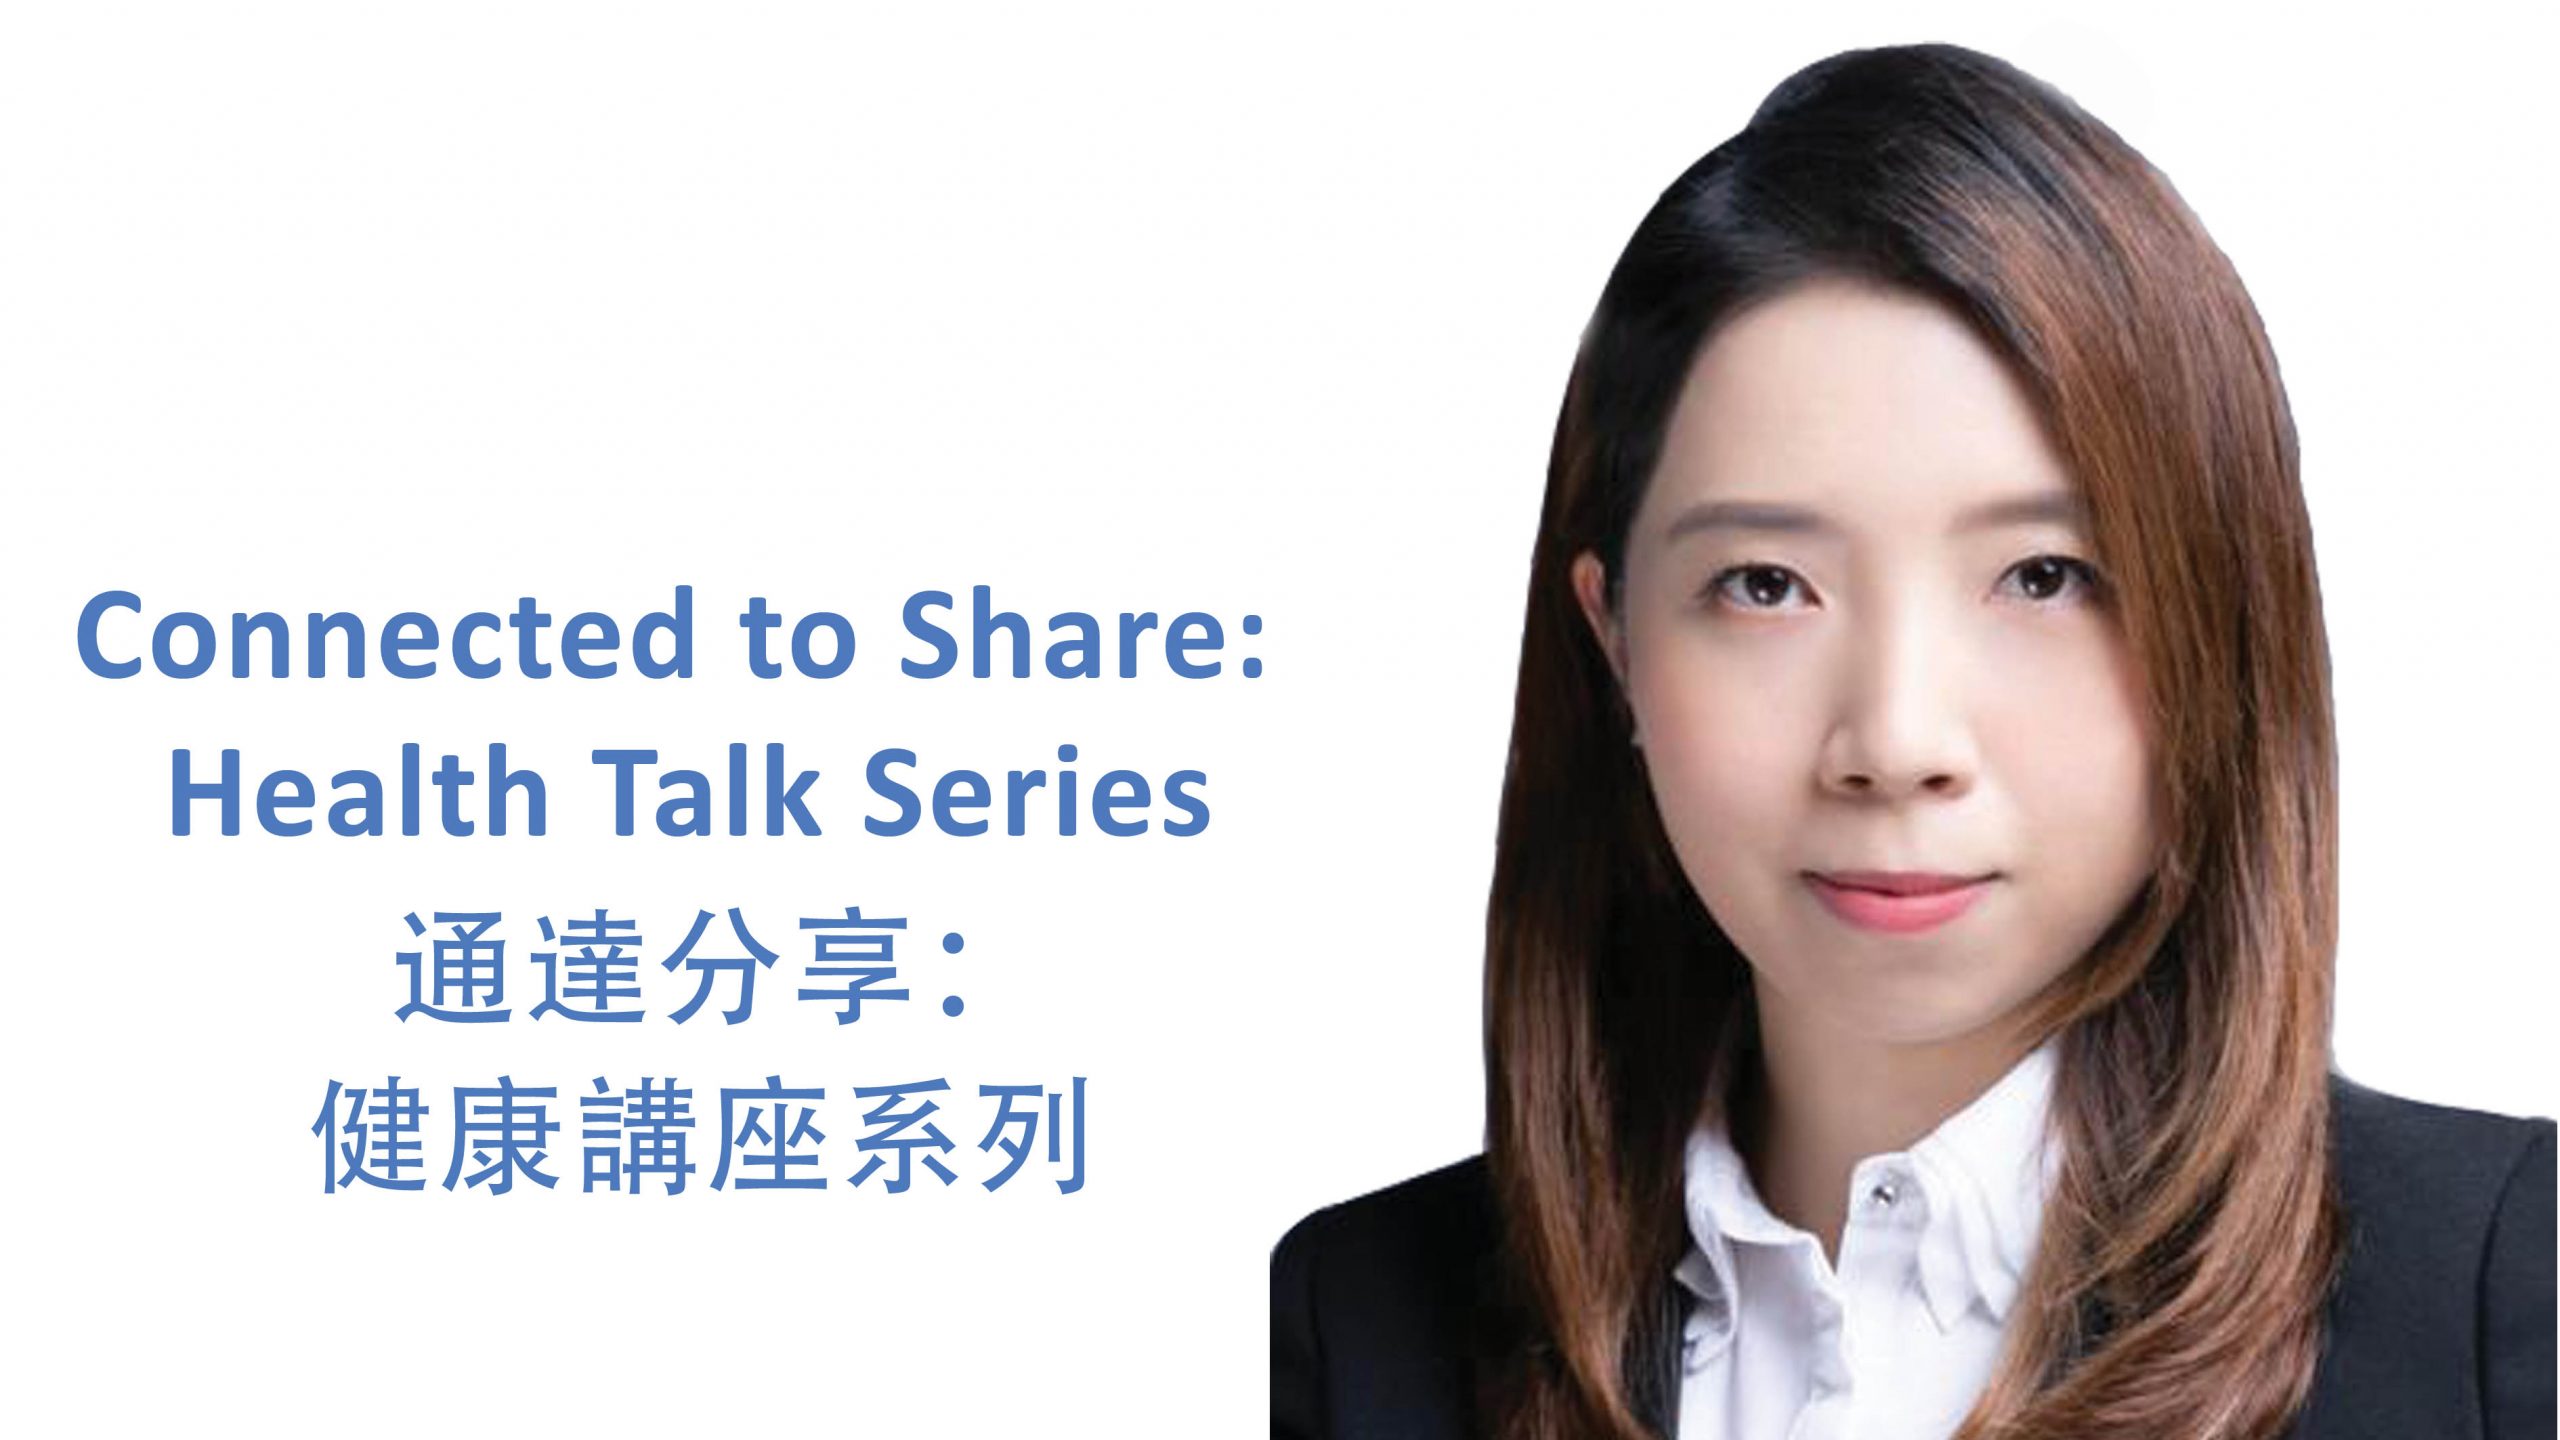 Connected to Share Health Talk Series by Dr Yeung Wan Yin